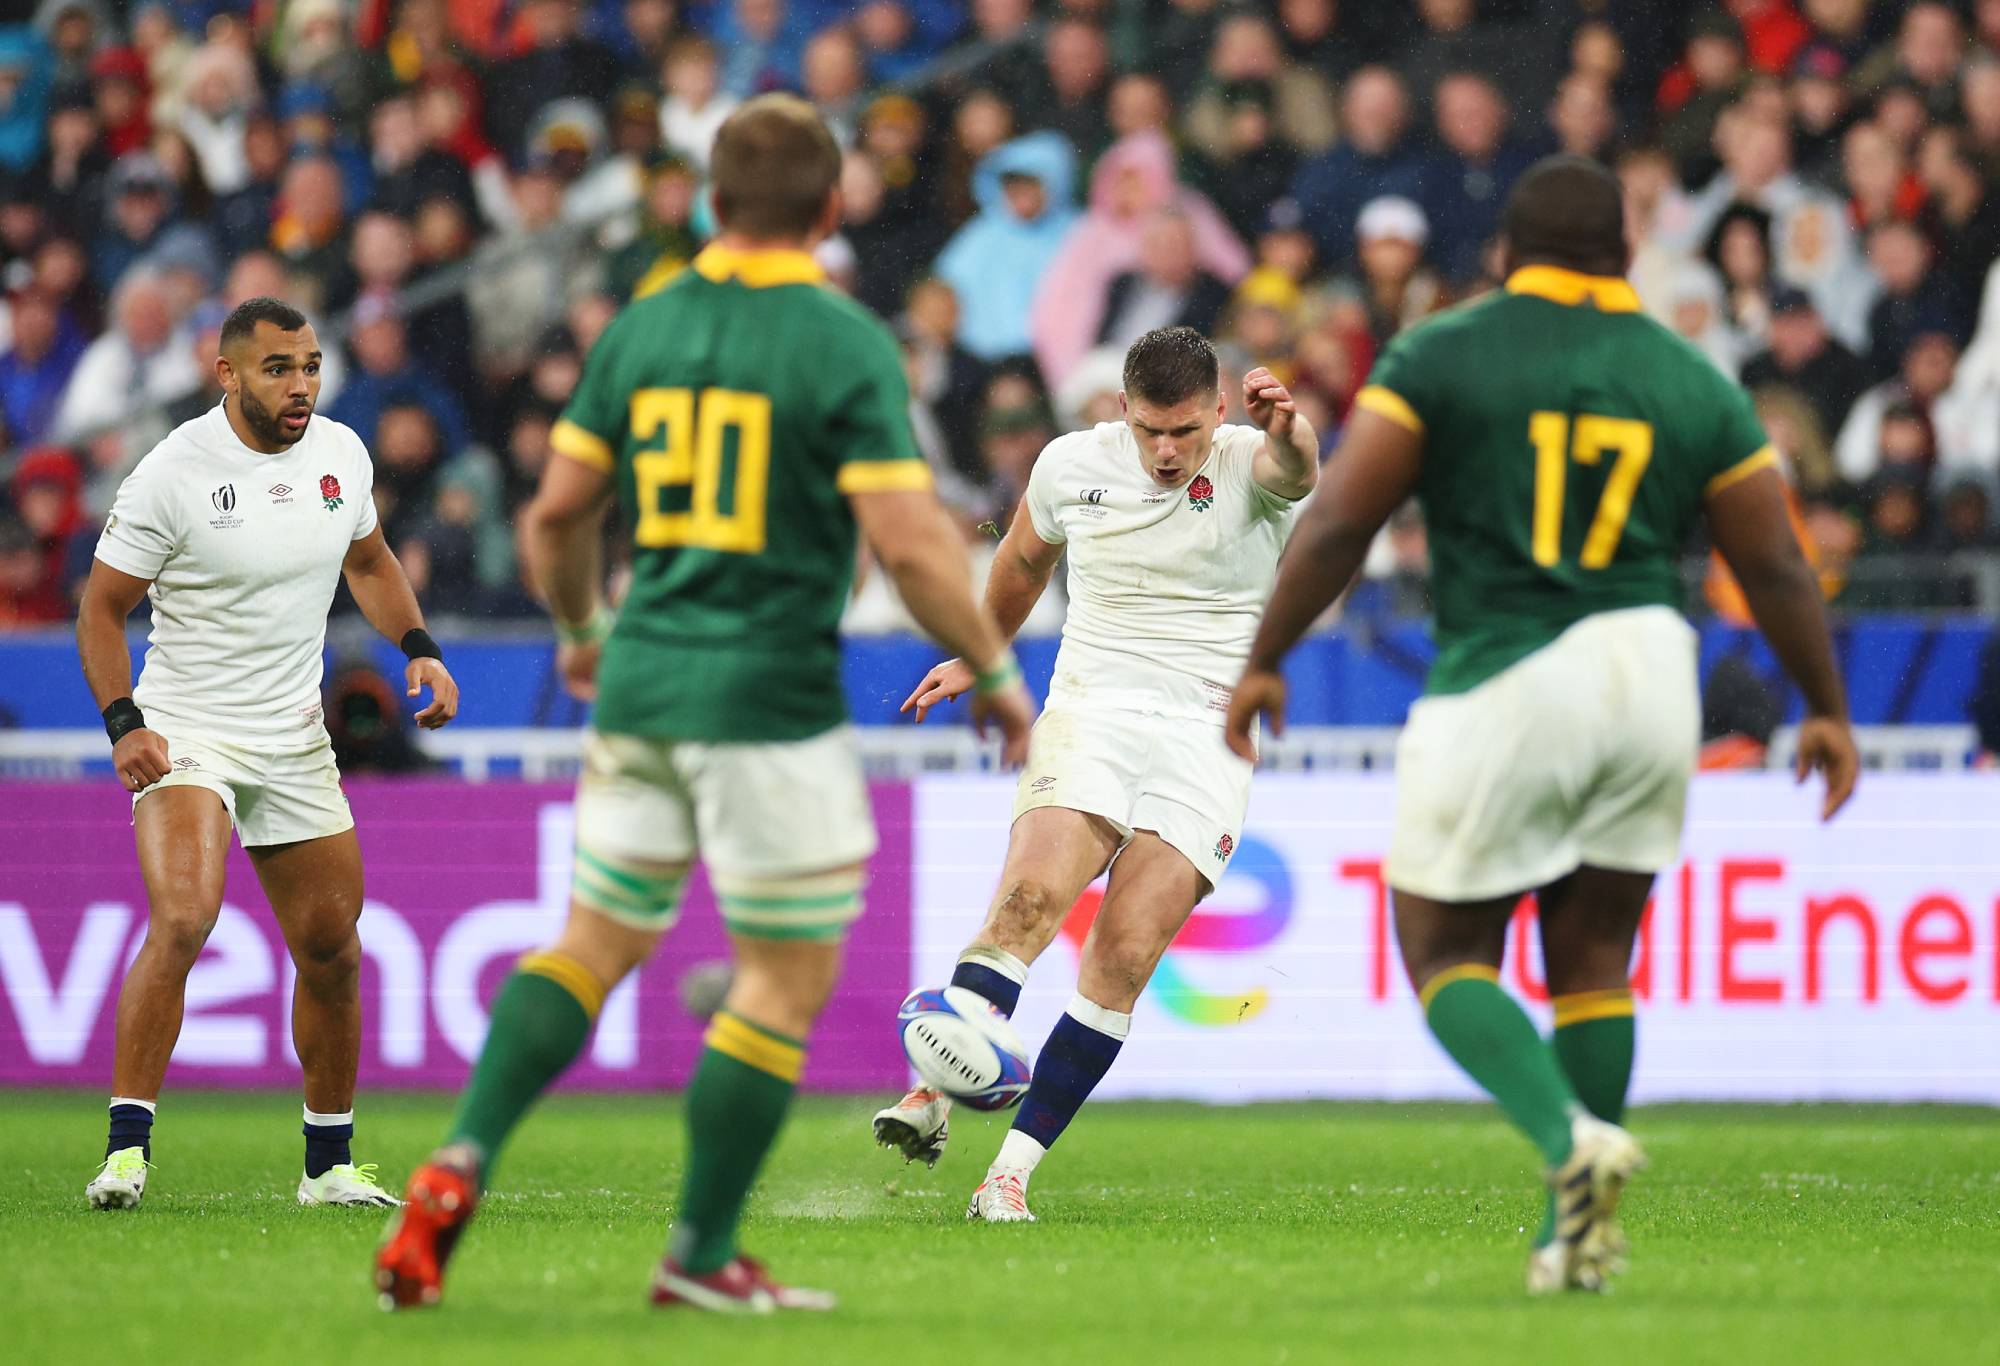 Owen Farrell of England scores a drop goal during the Rugby World Cup France 2023 match between England and South Africa at Stade de France on October 21, 2023 in Paris, France. (Photo by Adam Pretty - World Rugby/World Rugby via Getty Images)